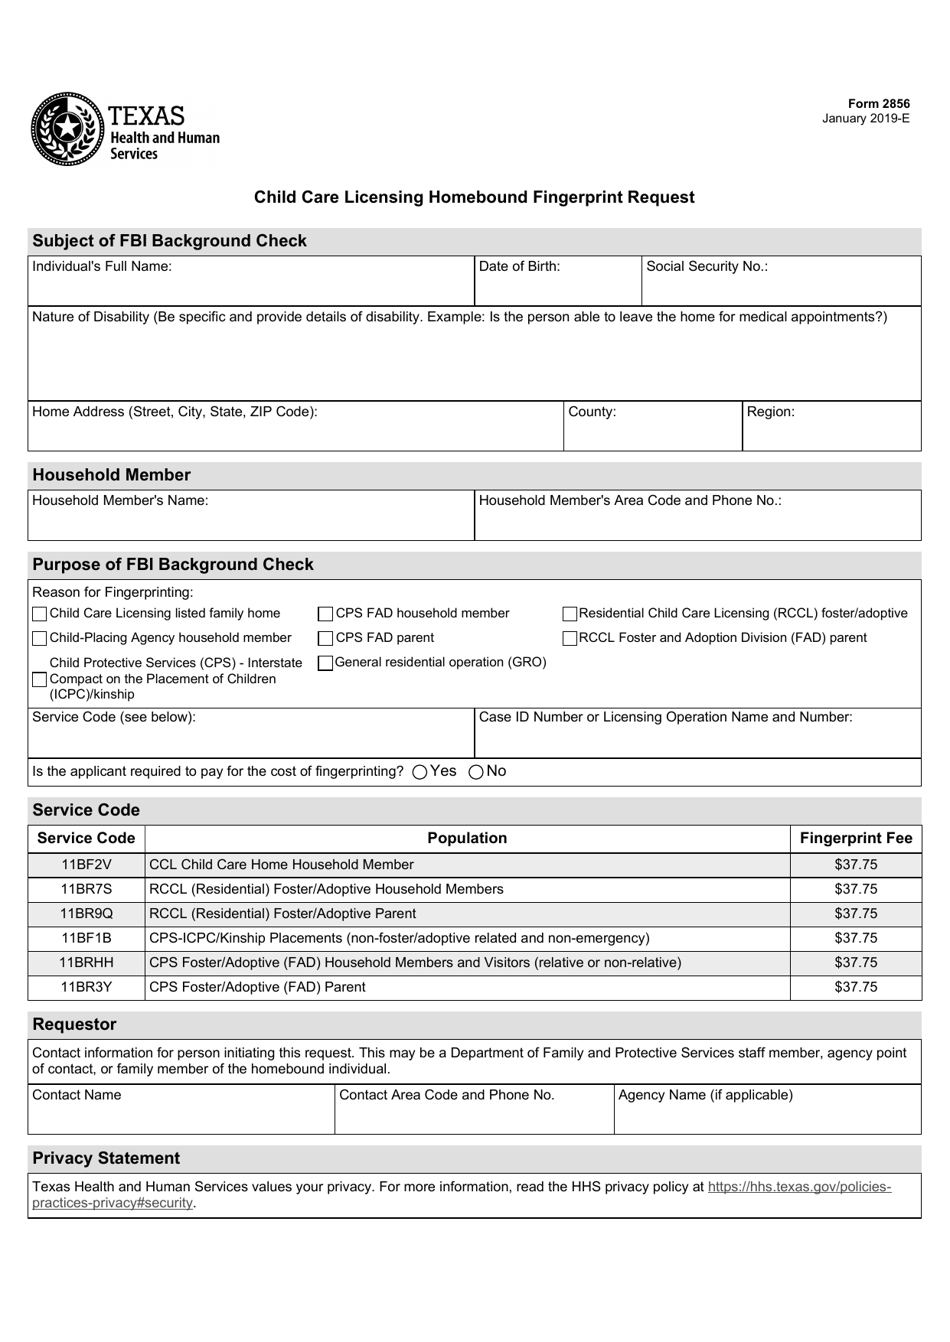 Form 2856 Child Care Licensing Homebound Fingerprint Request - Texas, Page 1